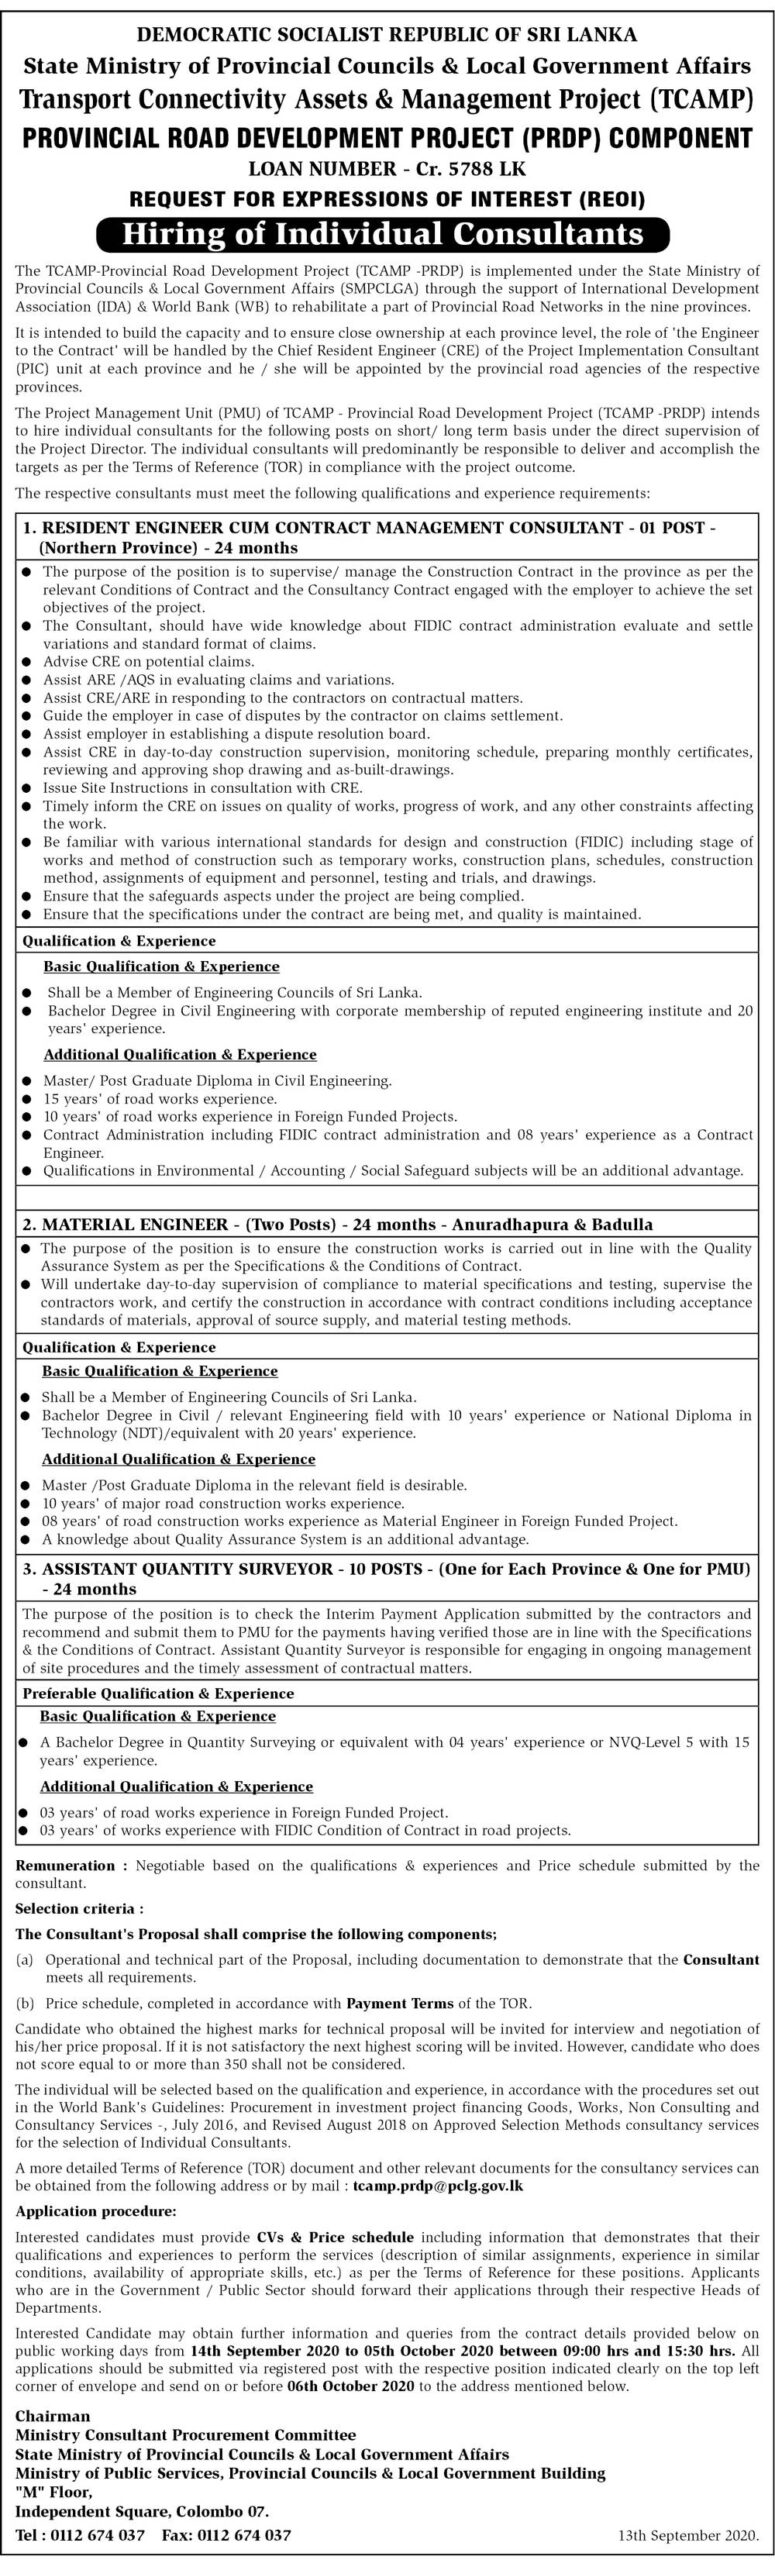 Resident Engineer cum Contract Management Consultant, Material Engineer, Assistant Quantity Surveyor, Government Jobs Vacancies 2023